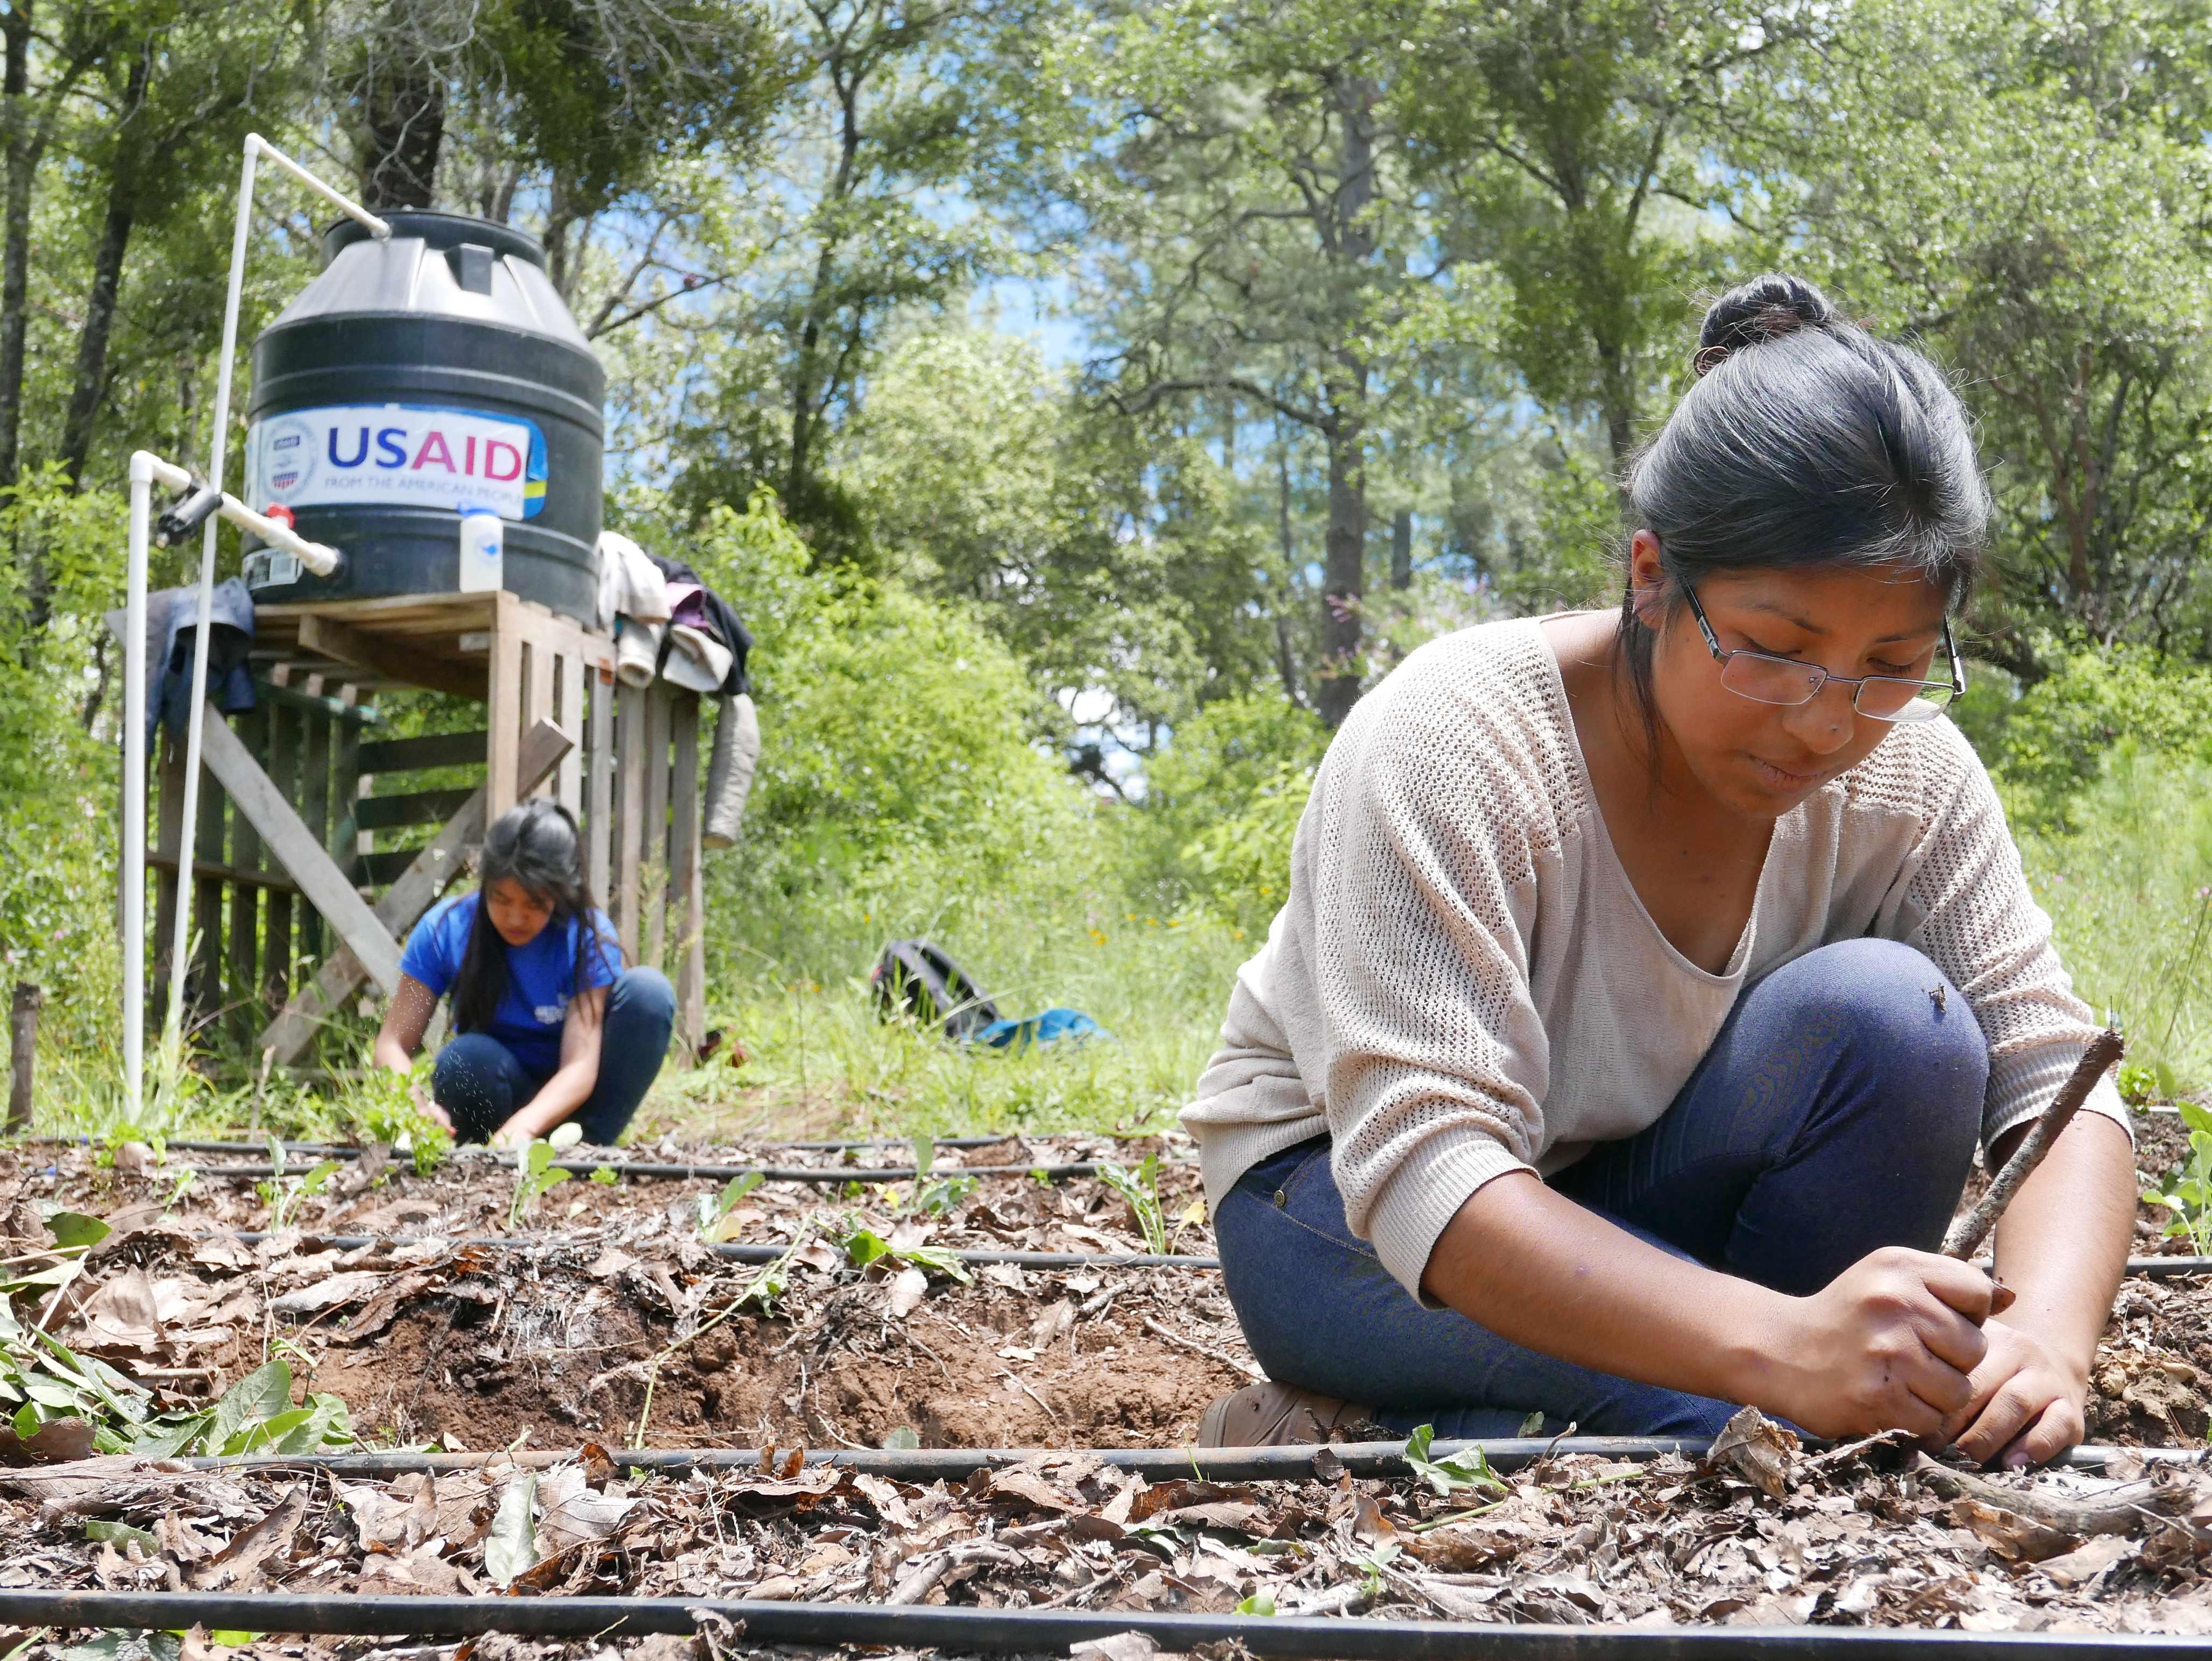 Young women working in garden plot with vegetable seedlings, drip irrigation hose, mulch, and USAID water tank in background